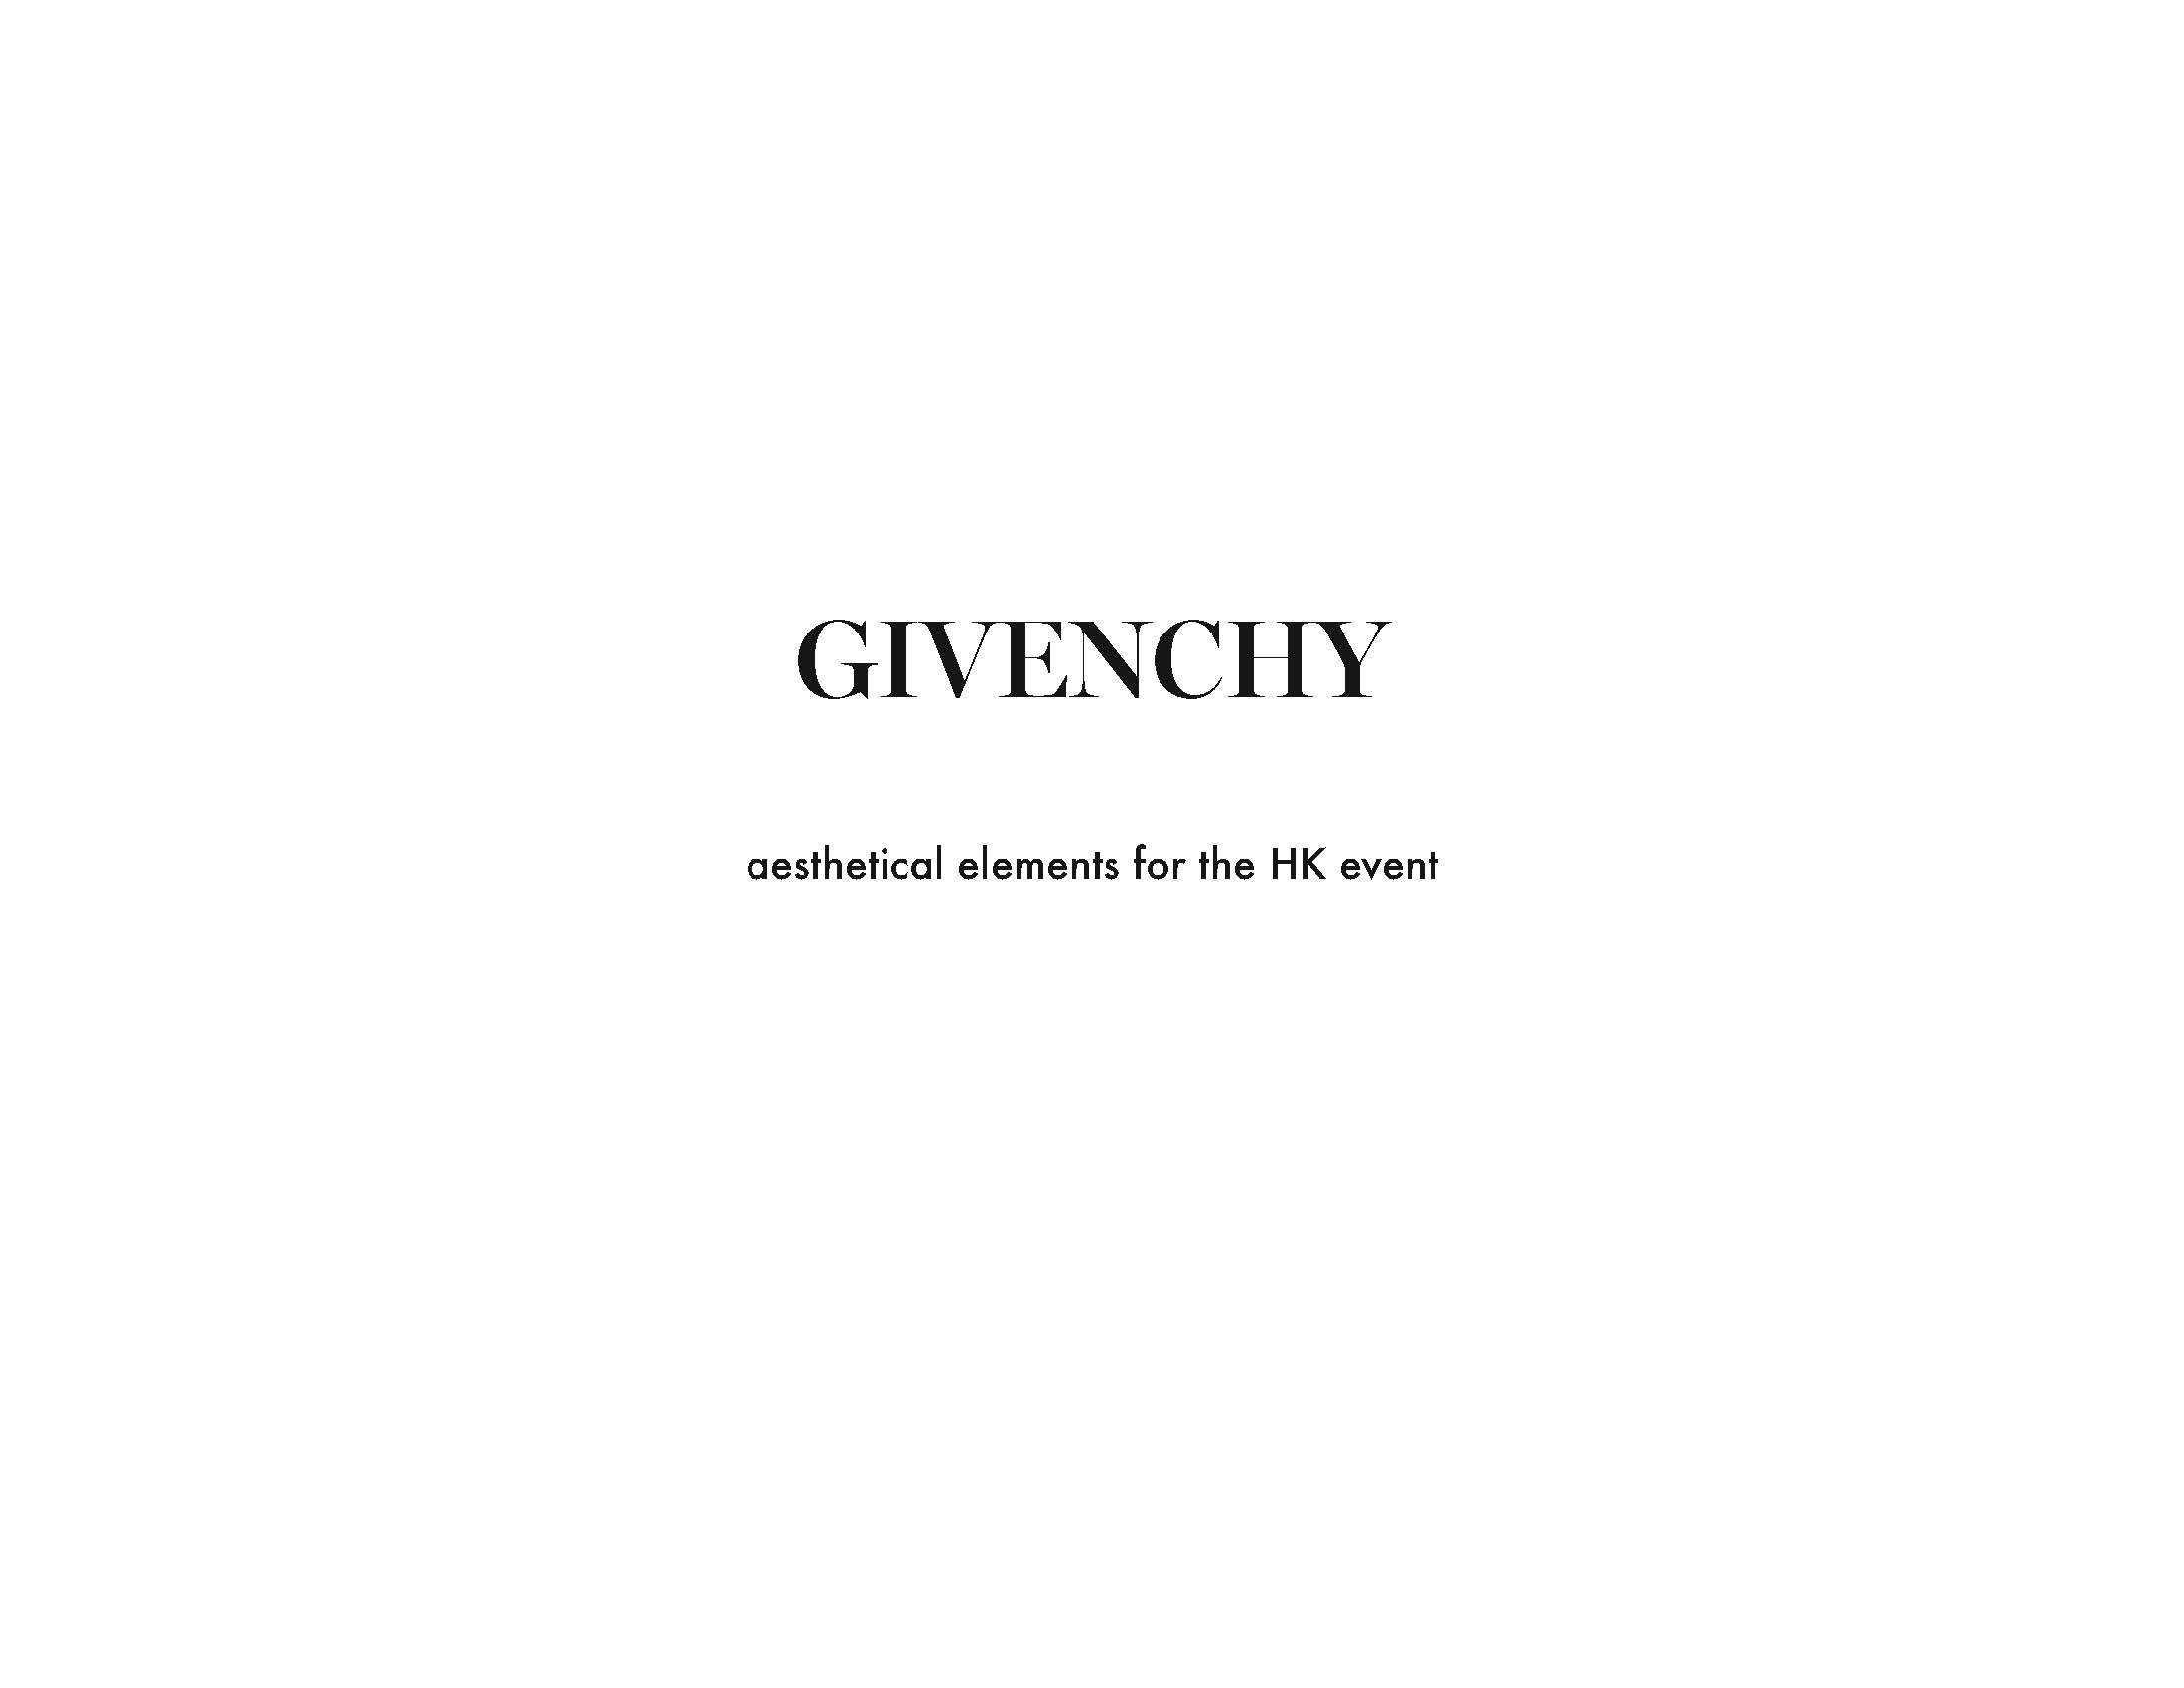 Givenchy aesthetical elements RESUME_Page_01.jpg